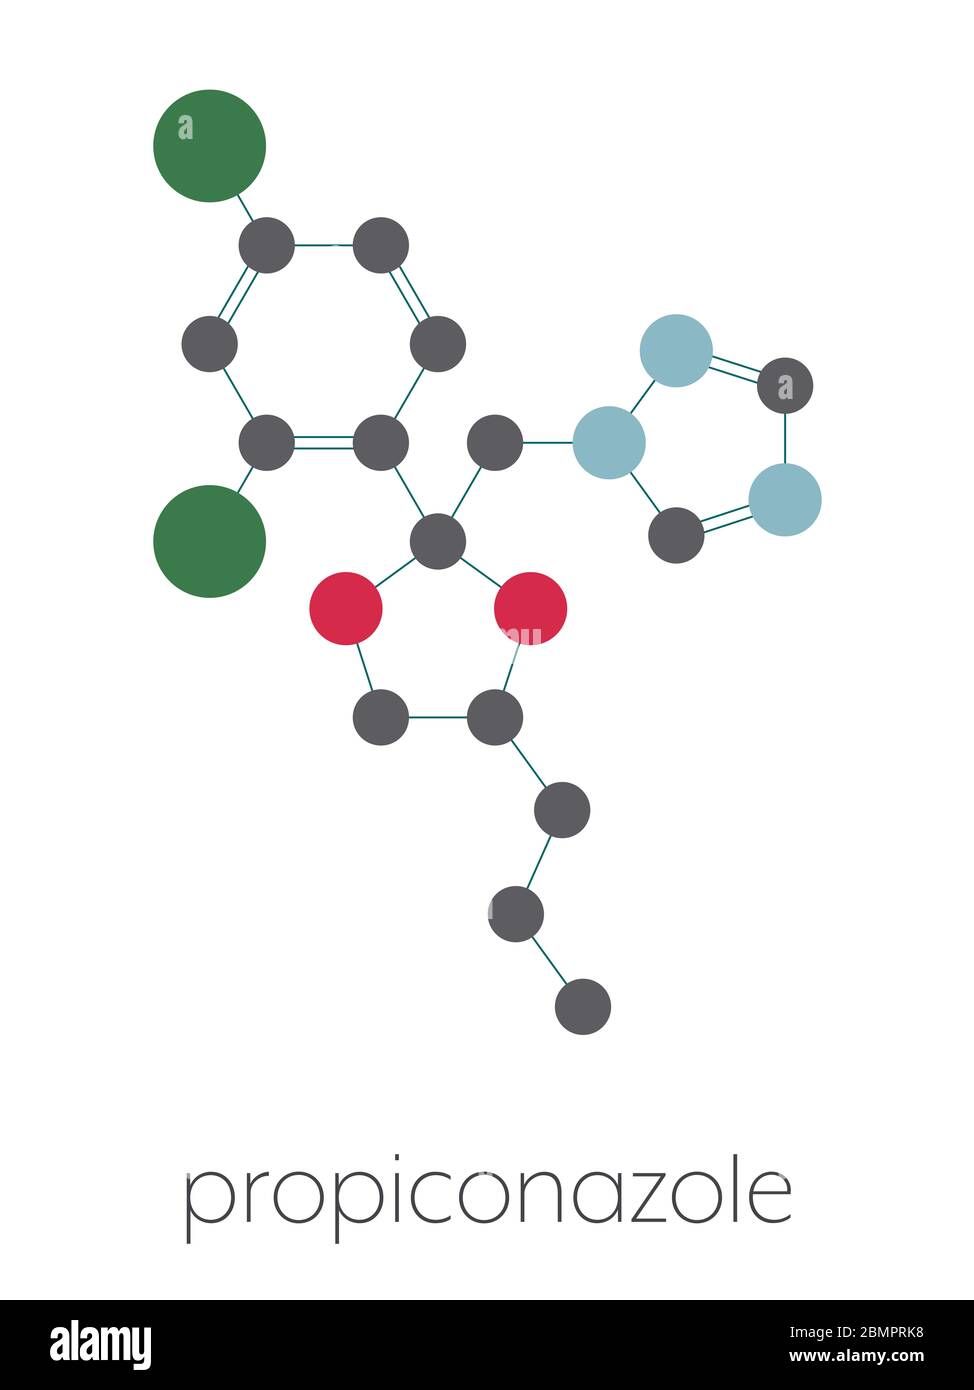 Propiconazole fungicide molecule, used in agriculture for crop protection. Stylized skeletal formula (chemical structure). Atoms are shown as color-coded circles: hydrogen (hidden), carbon (grey), nitrogen (blue), oxygen (red), chlorine (green). Stock Photo